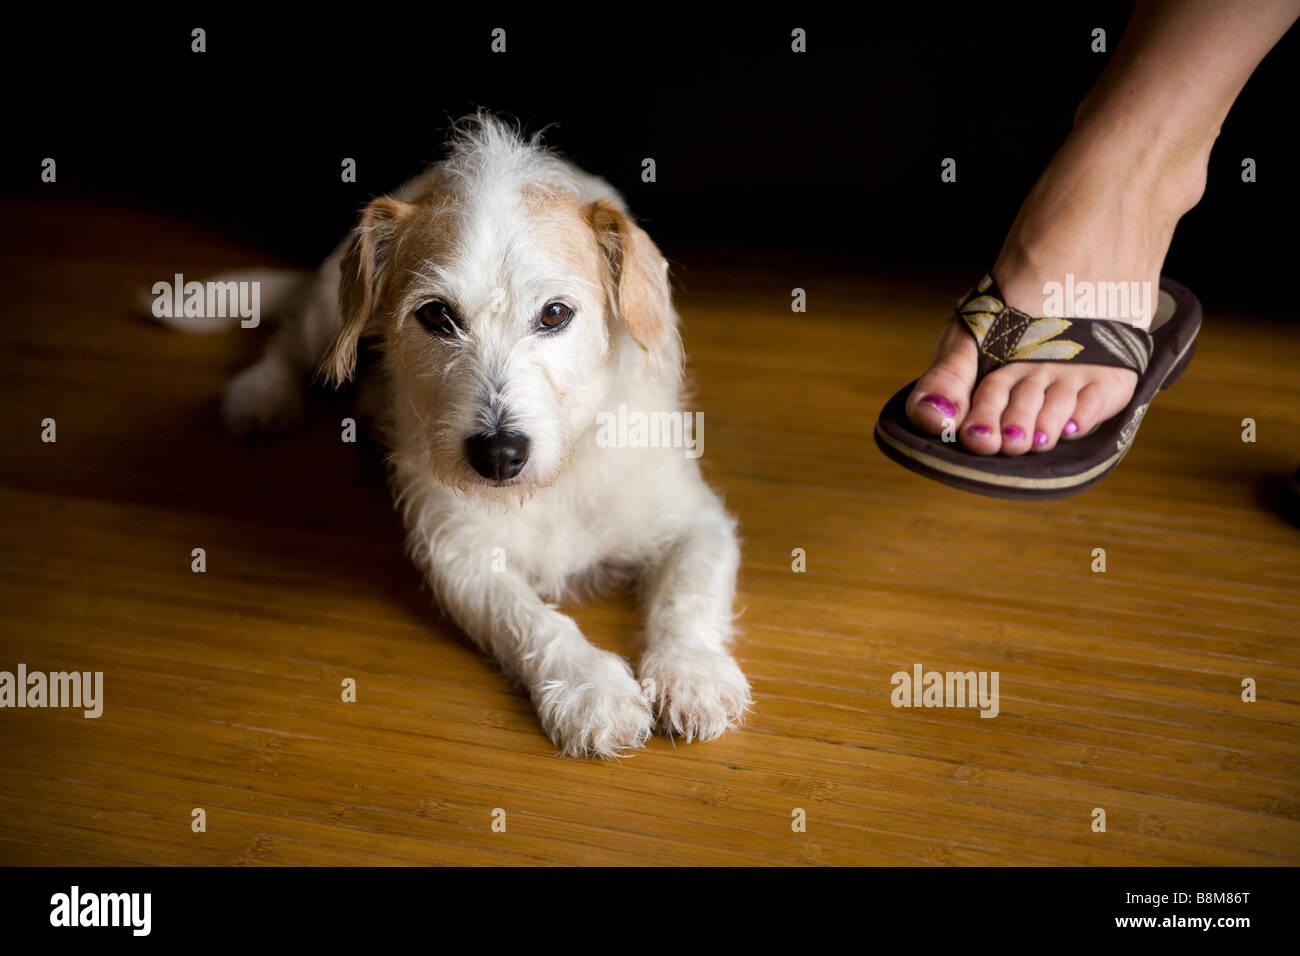 dog lying down next to owner Stock Photo